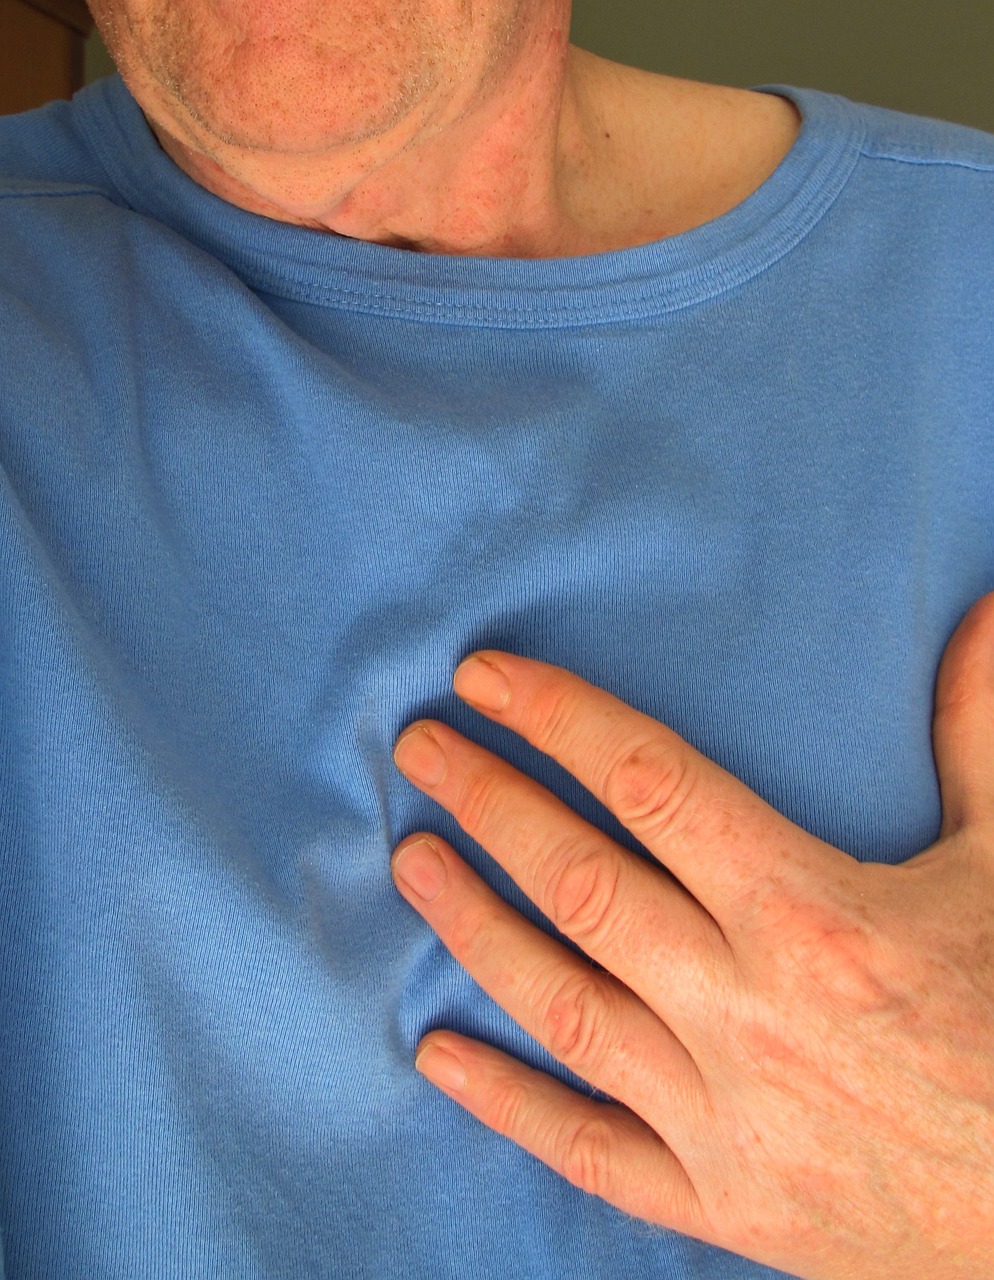 man in blue shirt with hand over heart